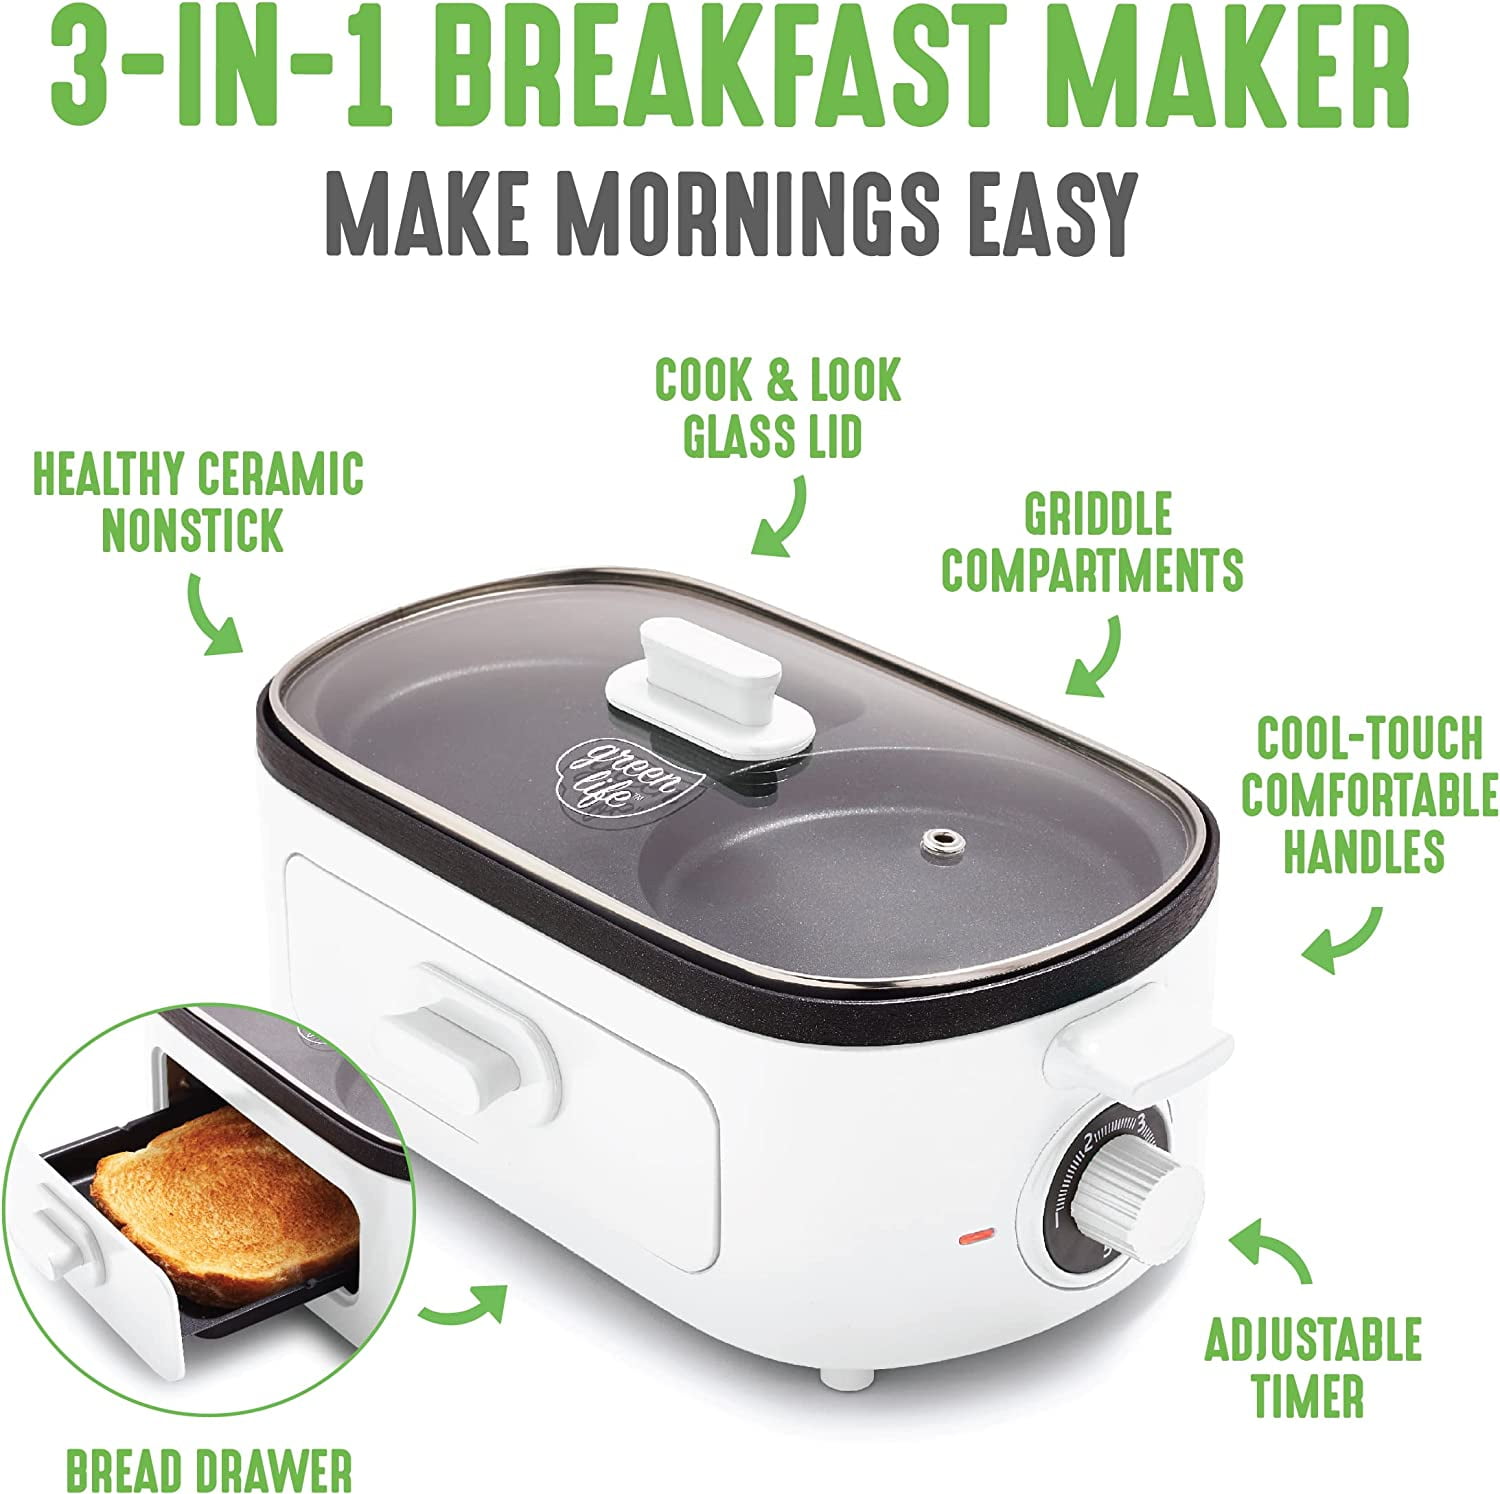 Relaxing with a breakfast-maker - CNET